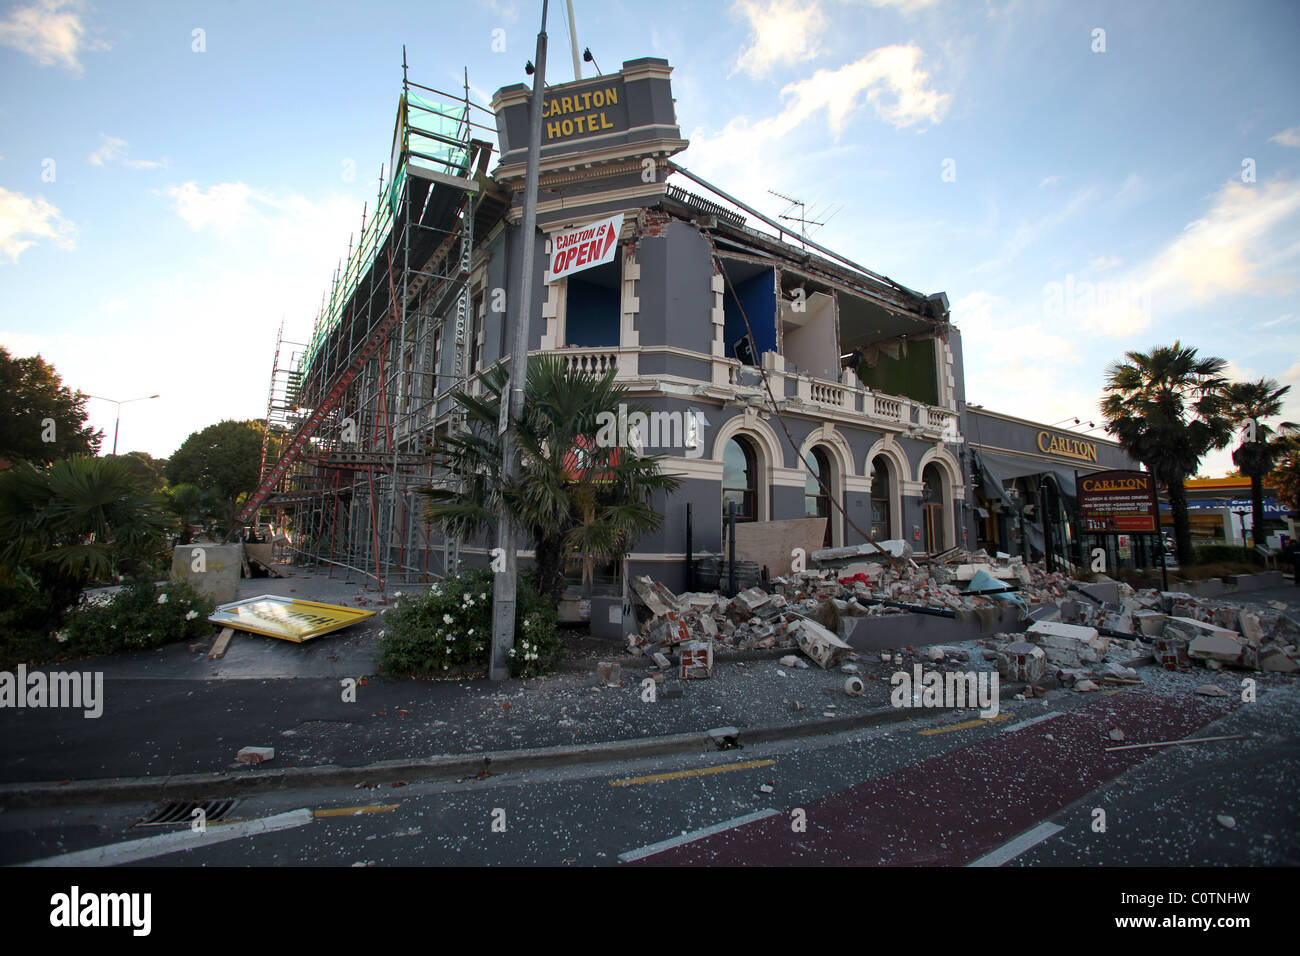 Ruined Carlton Hotel, Bealey Avenue, Christchurch, New Zealand, after the 6.3 magnitude earthquake Stock Photo